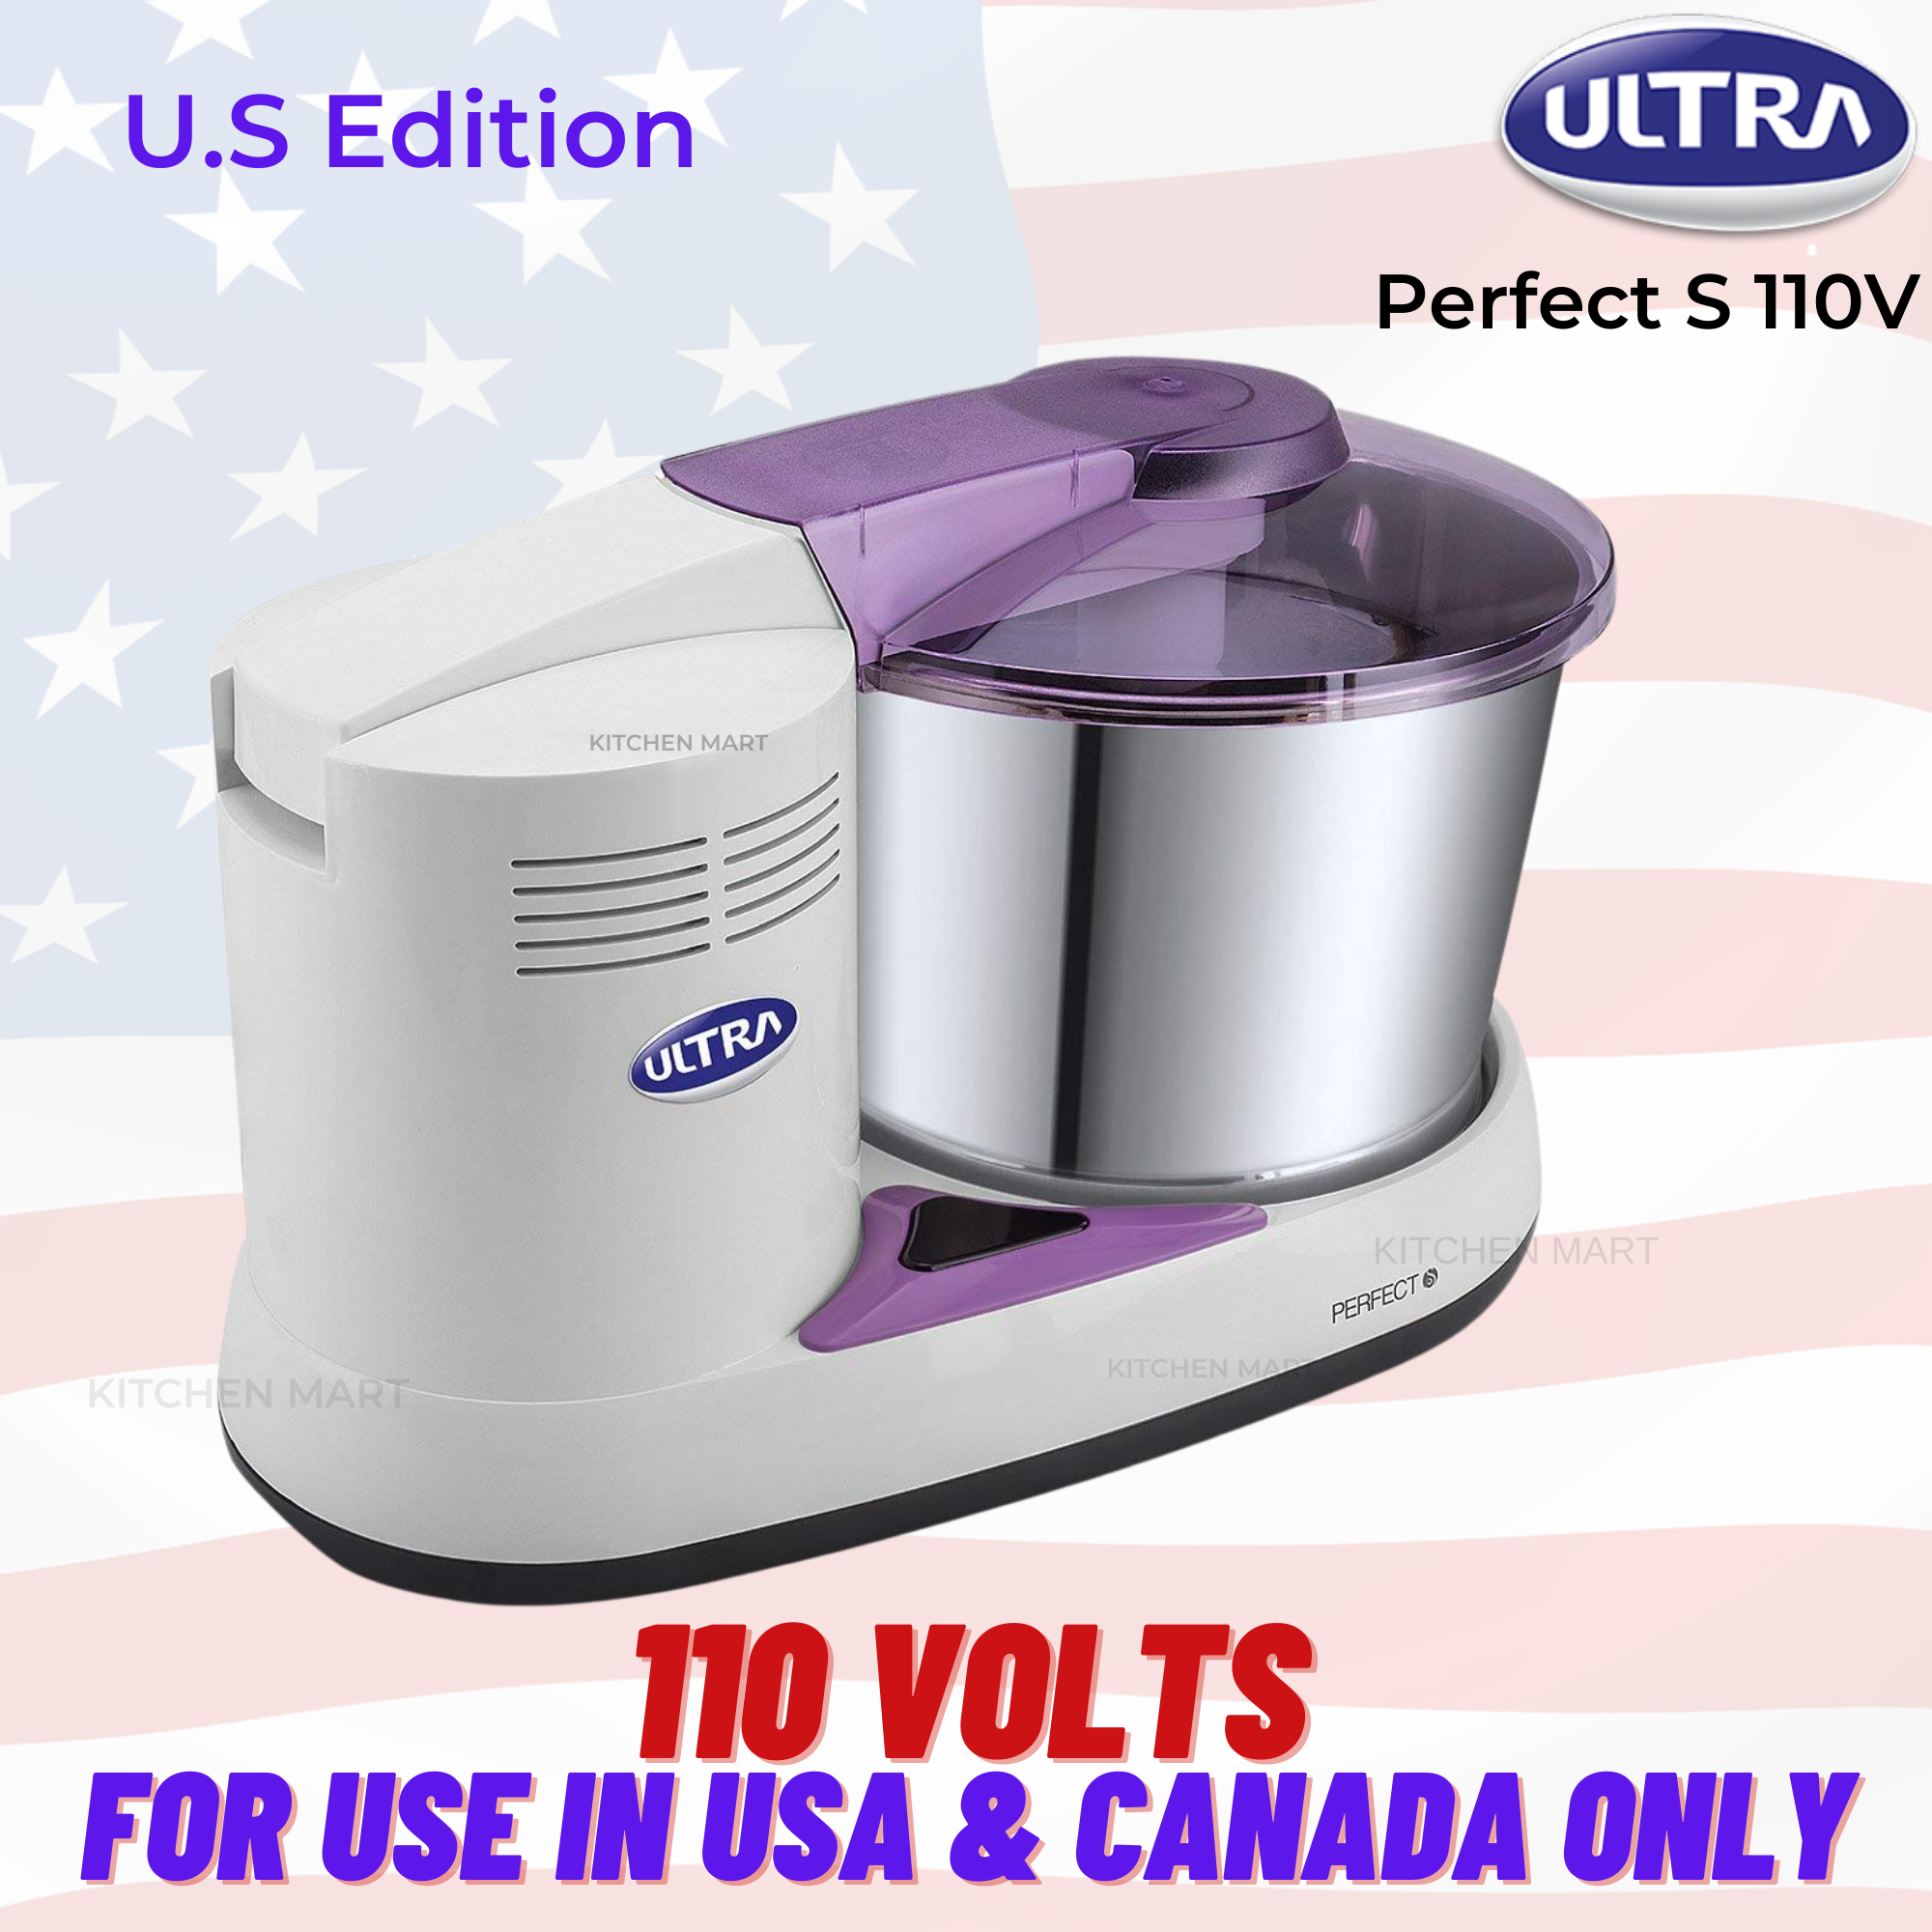 ultra wet grinder perfect s 110volts for usa